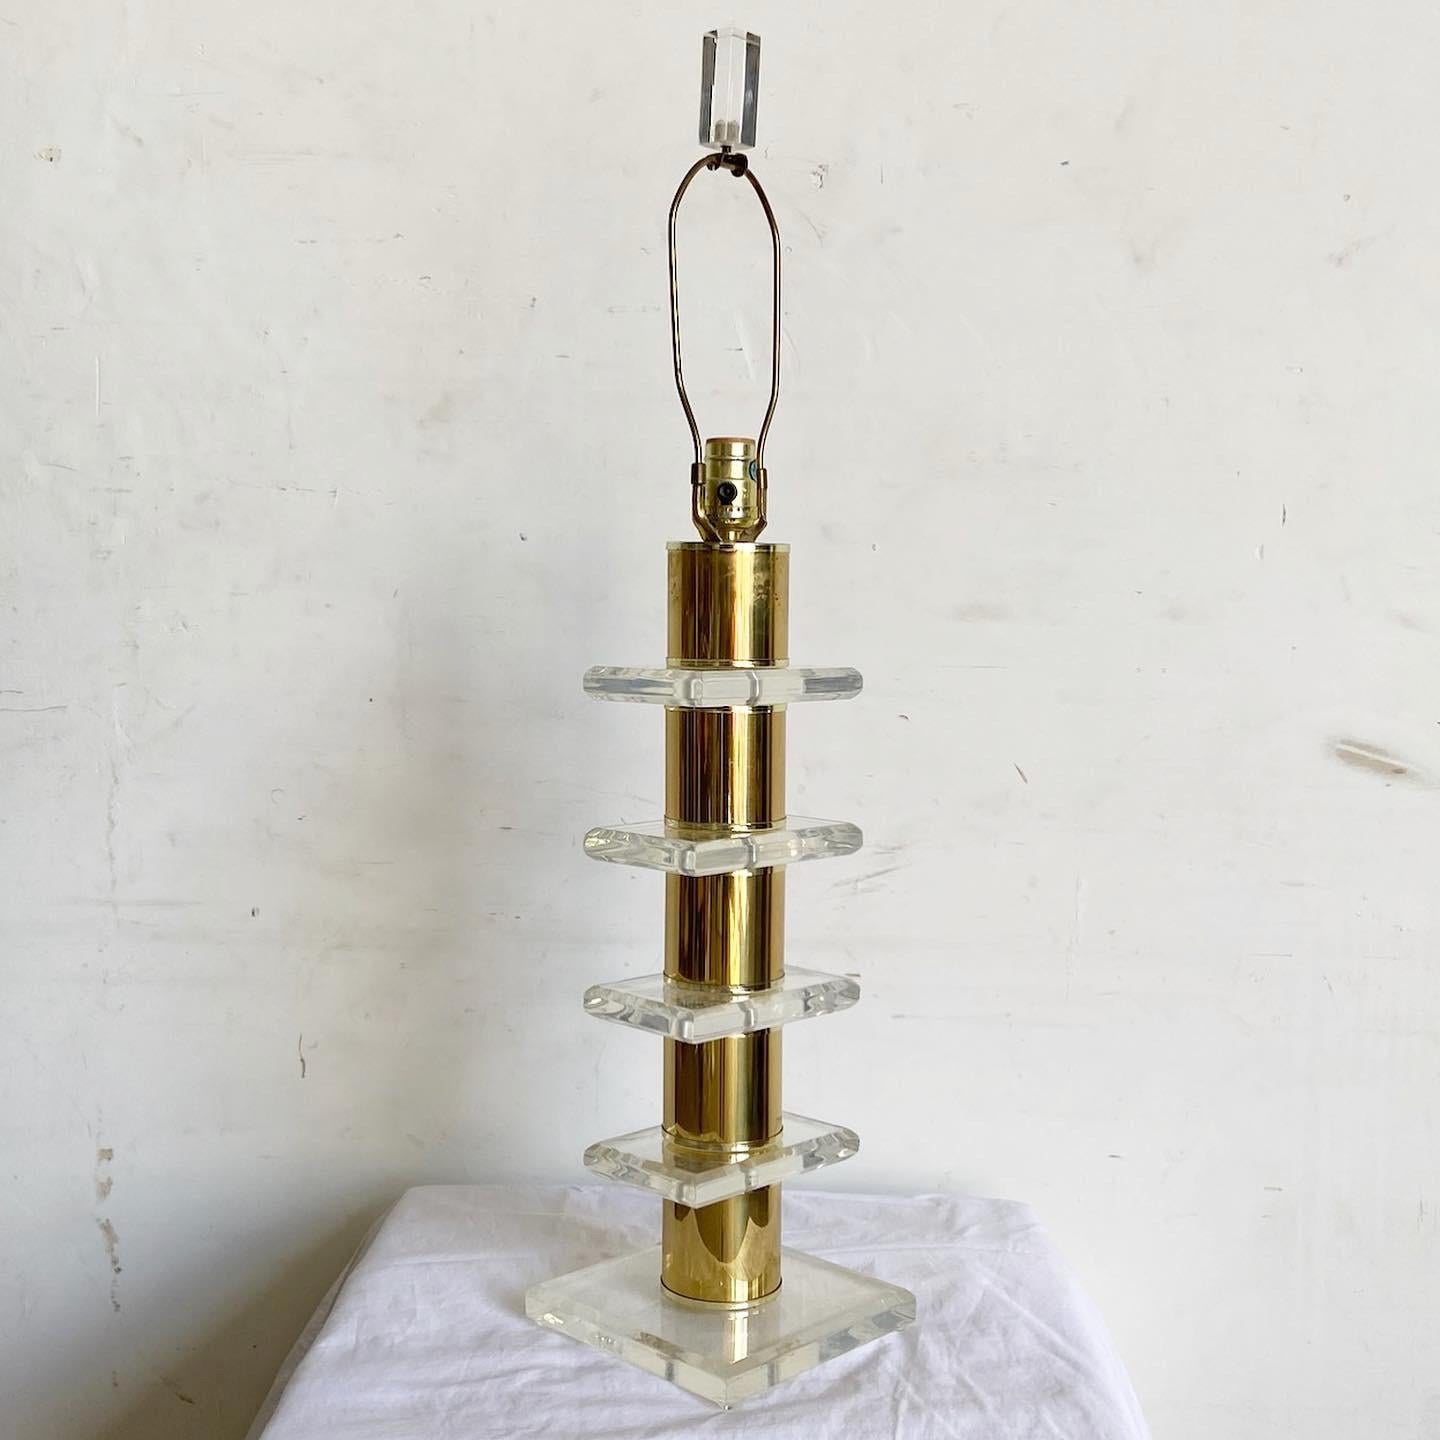 Step into the world of retro-modern elegance with this Lucite Gold Mid Century Lamp. The stacked Lucite design, complemented by gold accents, captures the essence of Mid Century Modern aesthetics. Its translucent layers play with light, offering